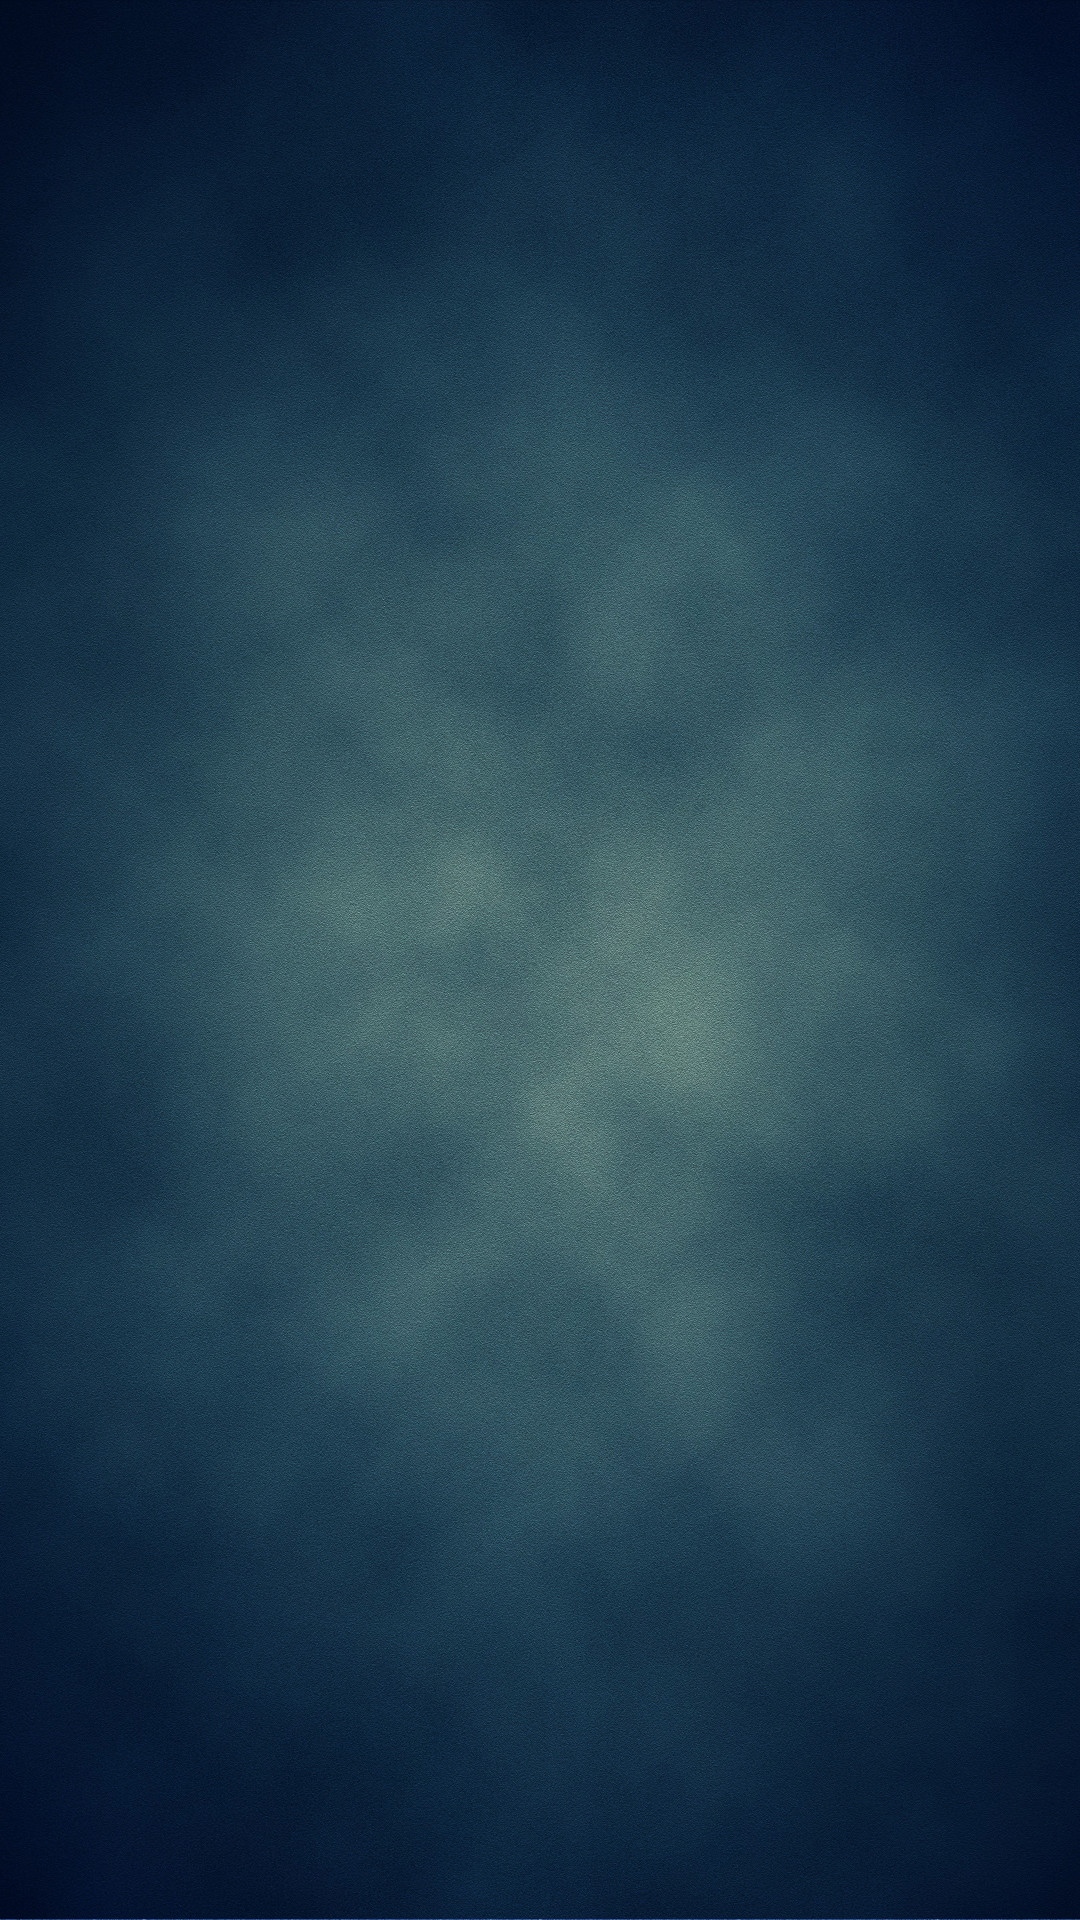 1080x1920 Blue htc one wallpaper Leather